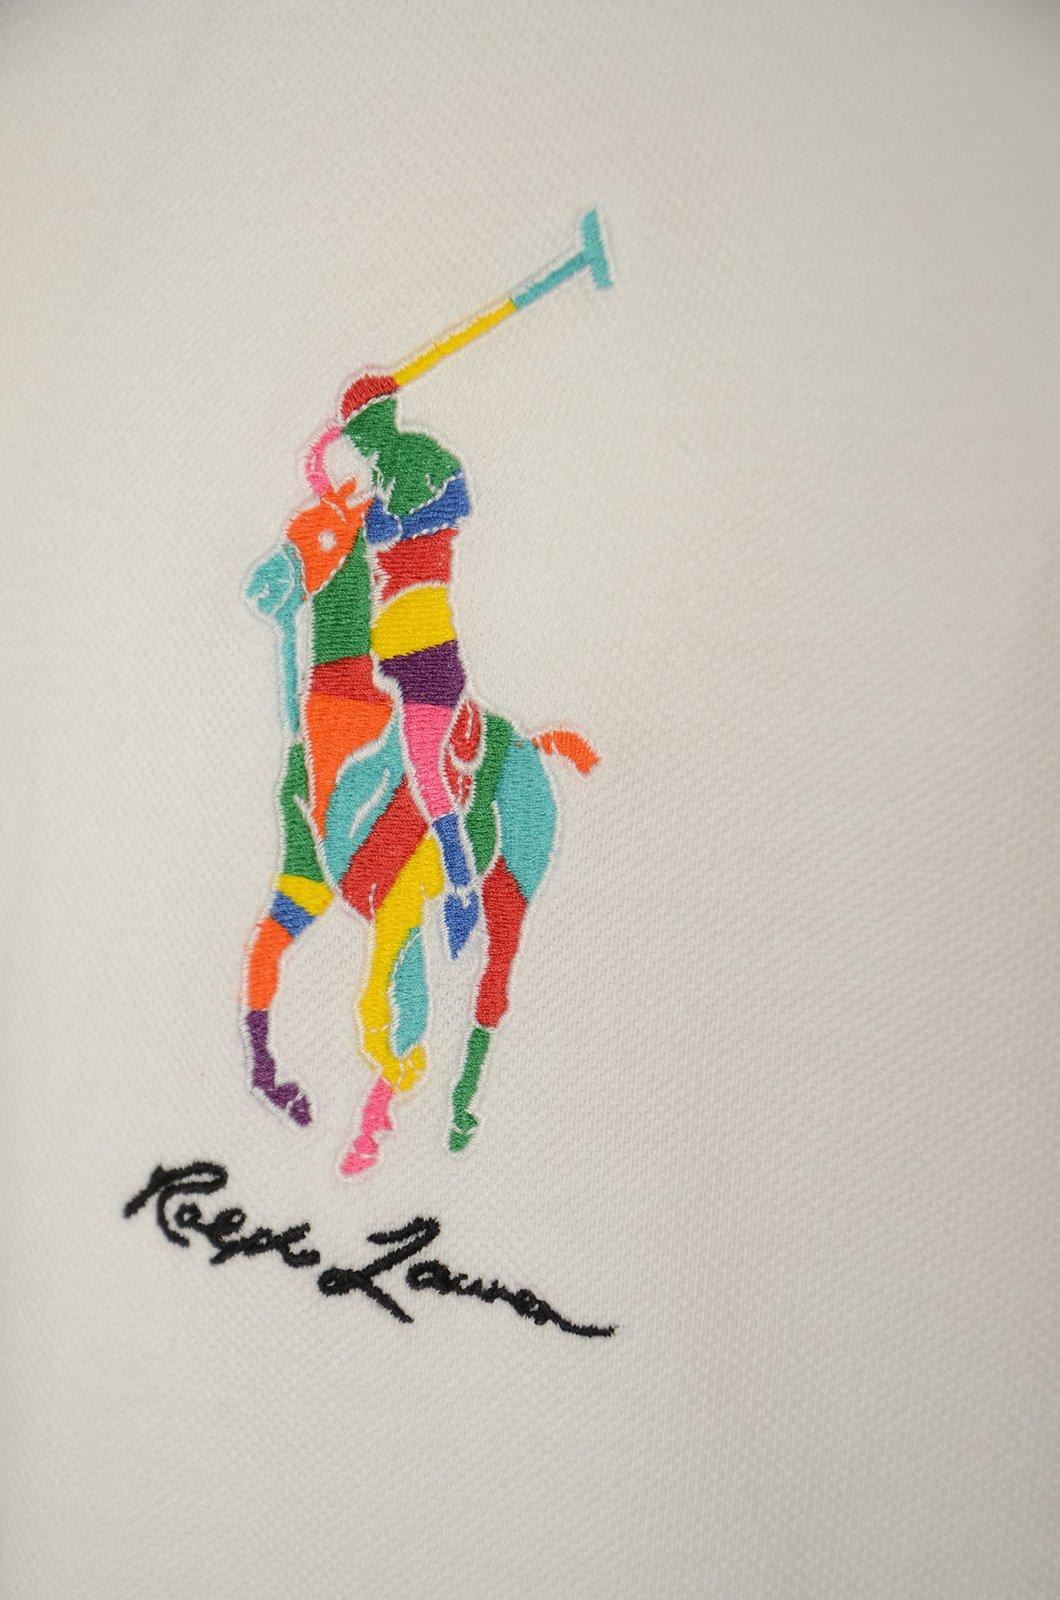 Shop Ralph Lauren Pony Embroidered Polo Shirt